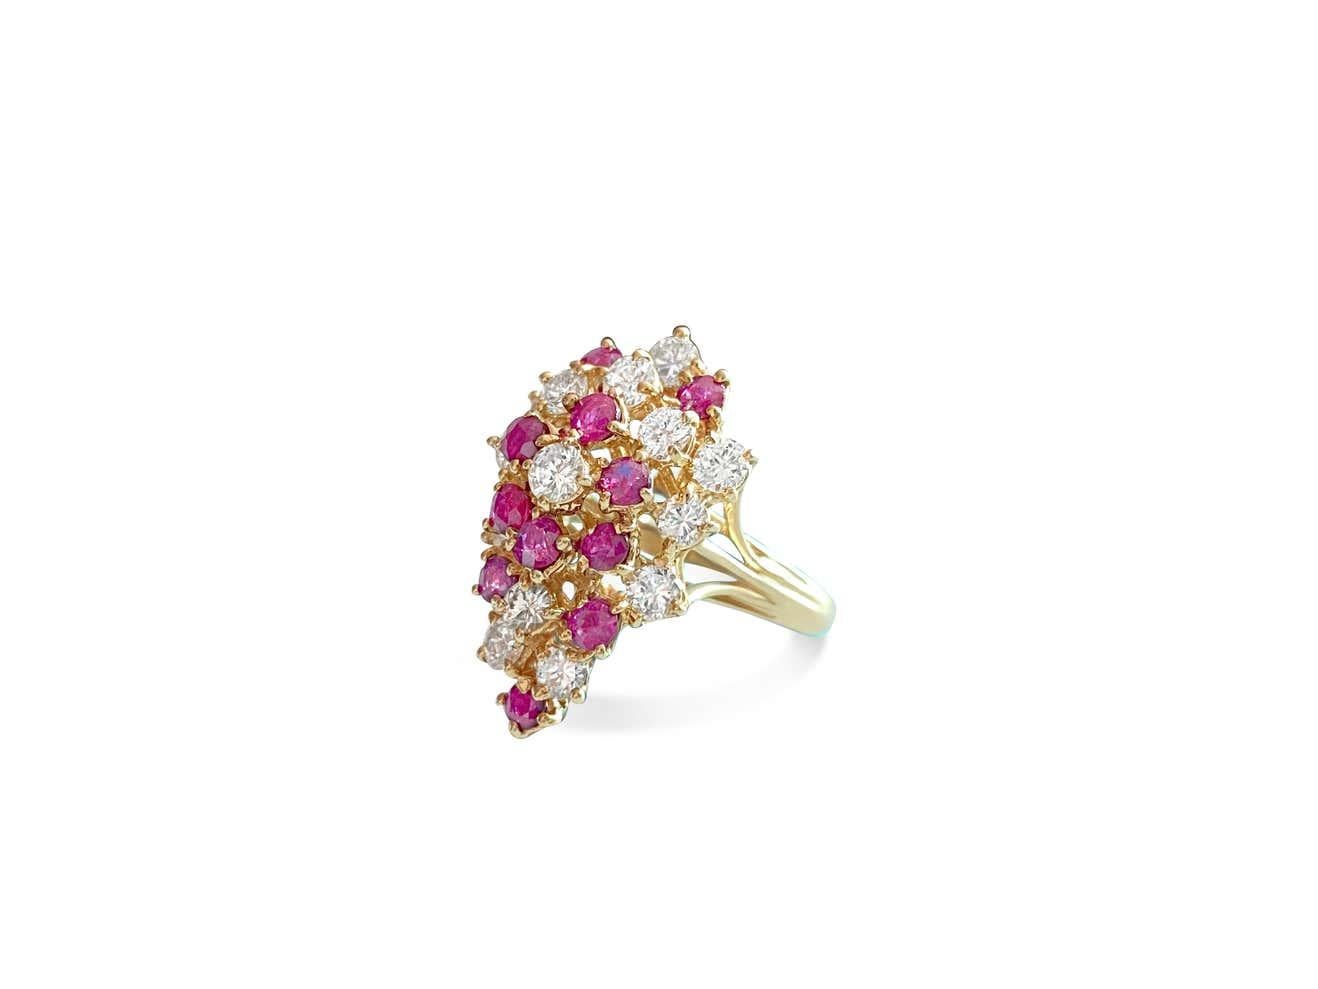 14K Yellow Gold. 1.50 ct natural Burma ruby, round cut. 2.00-carat diamonds; VS clarity and F color. Round brilliant cut. All stones are set in a prong setting. All stones are 100% natural and earth-mined. Certified by GIA graduate gemologist, AGI